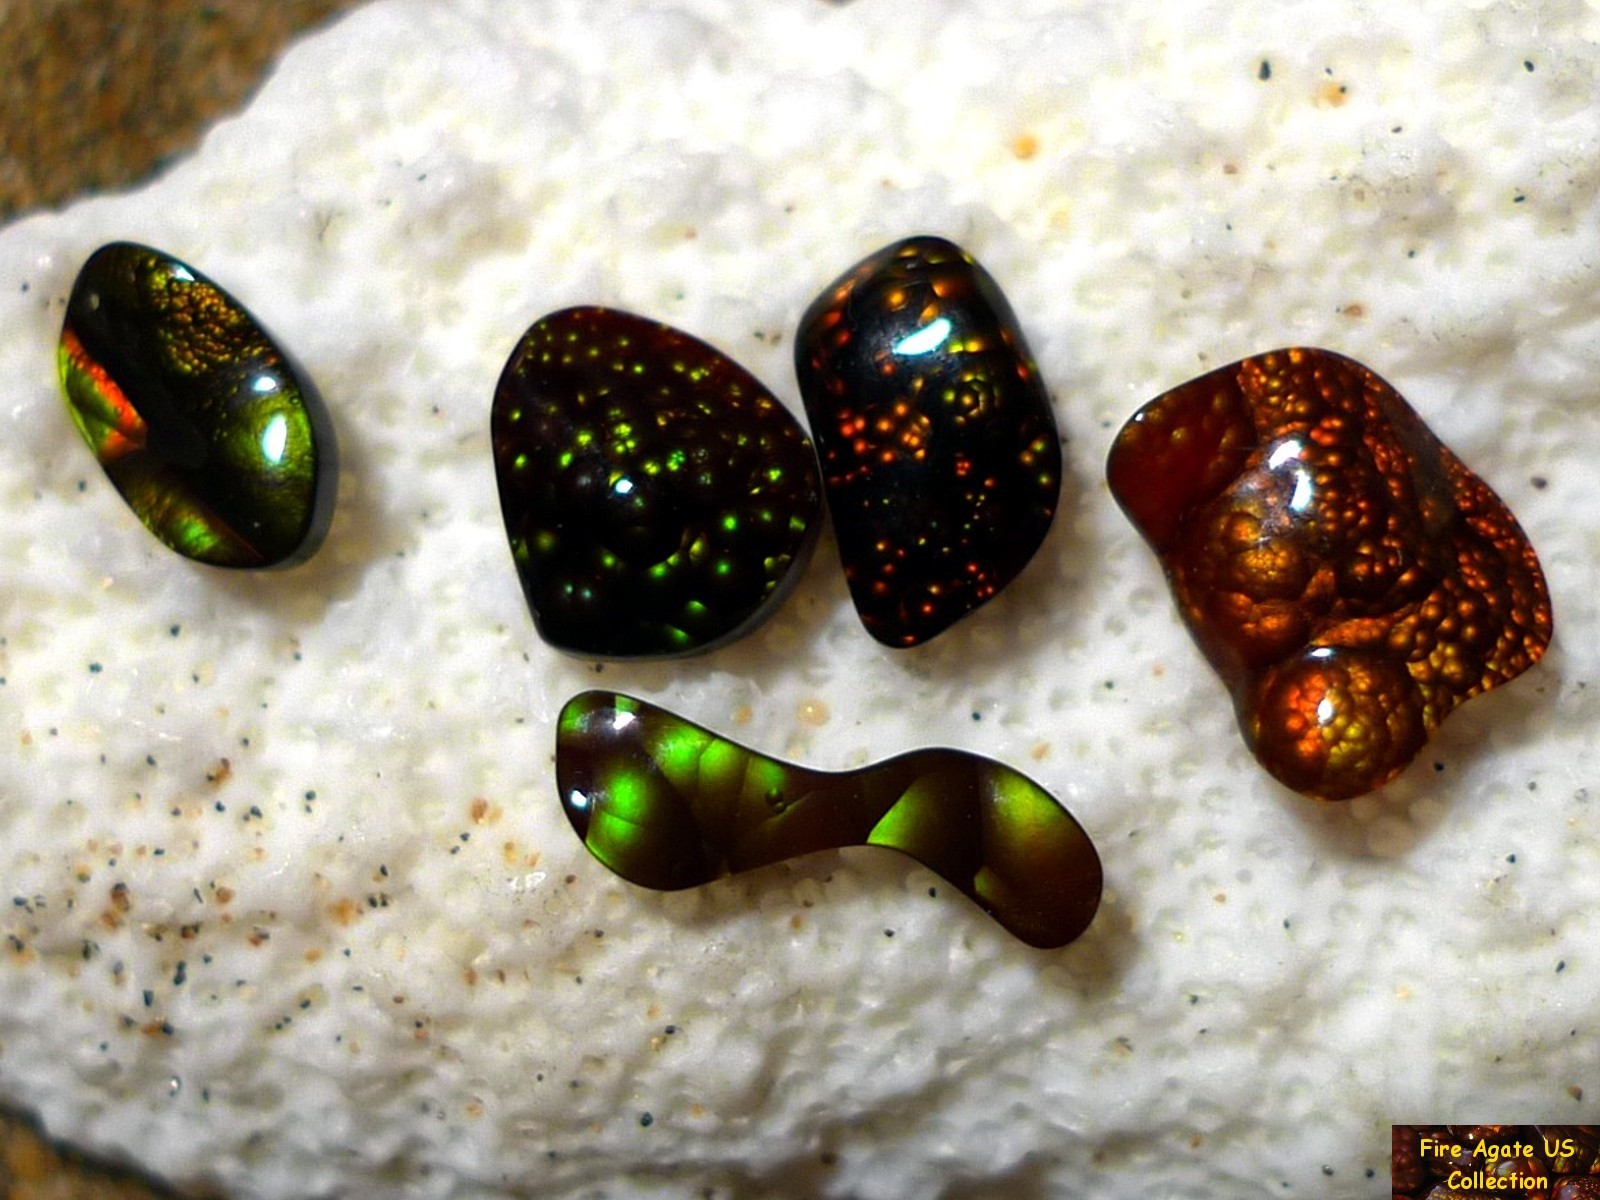 Group of Five Fire Agate Cabochons 4.6 Total Carat Weight Deer Creek Slaughter Mountain Arizona Gems SLG068 Photo 8